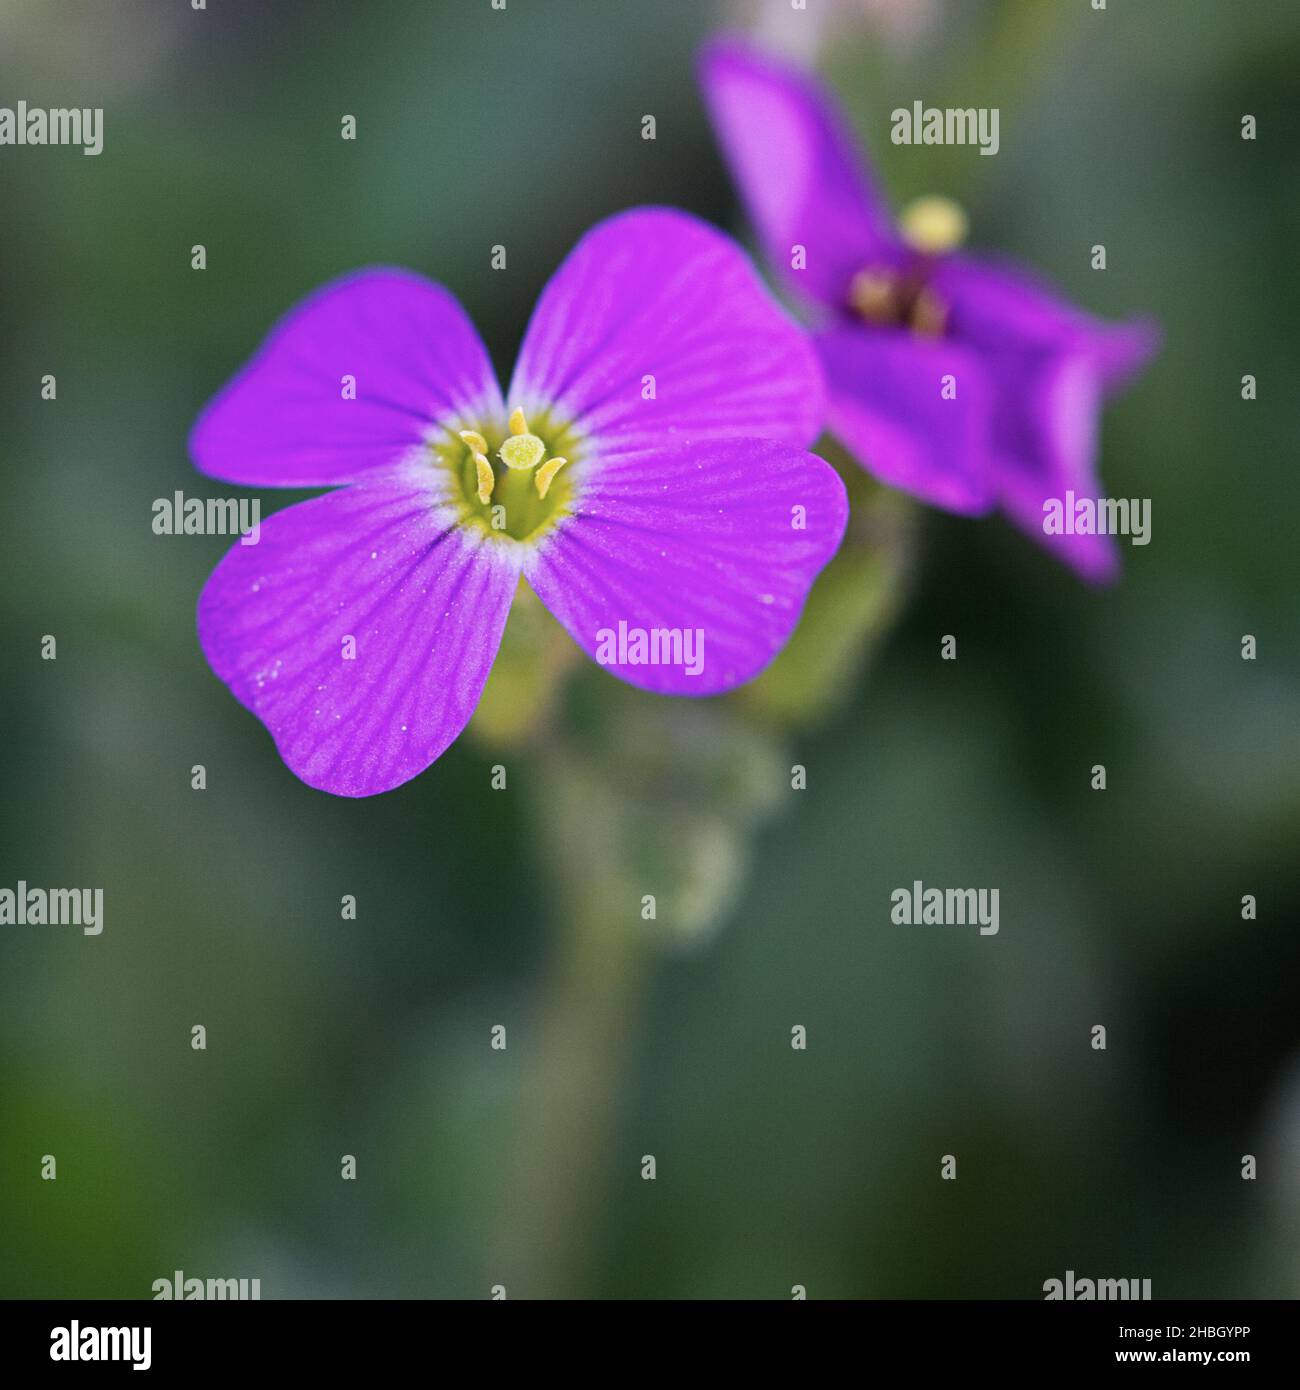 A closeup shot of a Purple rock cress flower on a blurred background Stock Photo